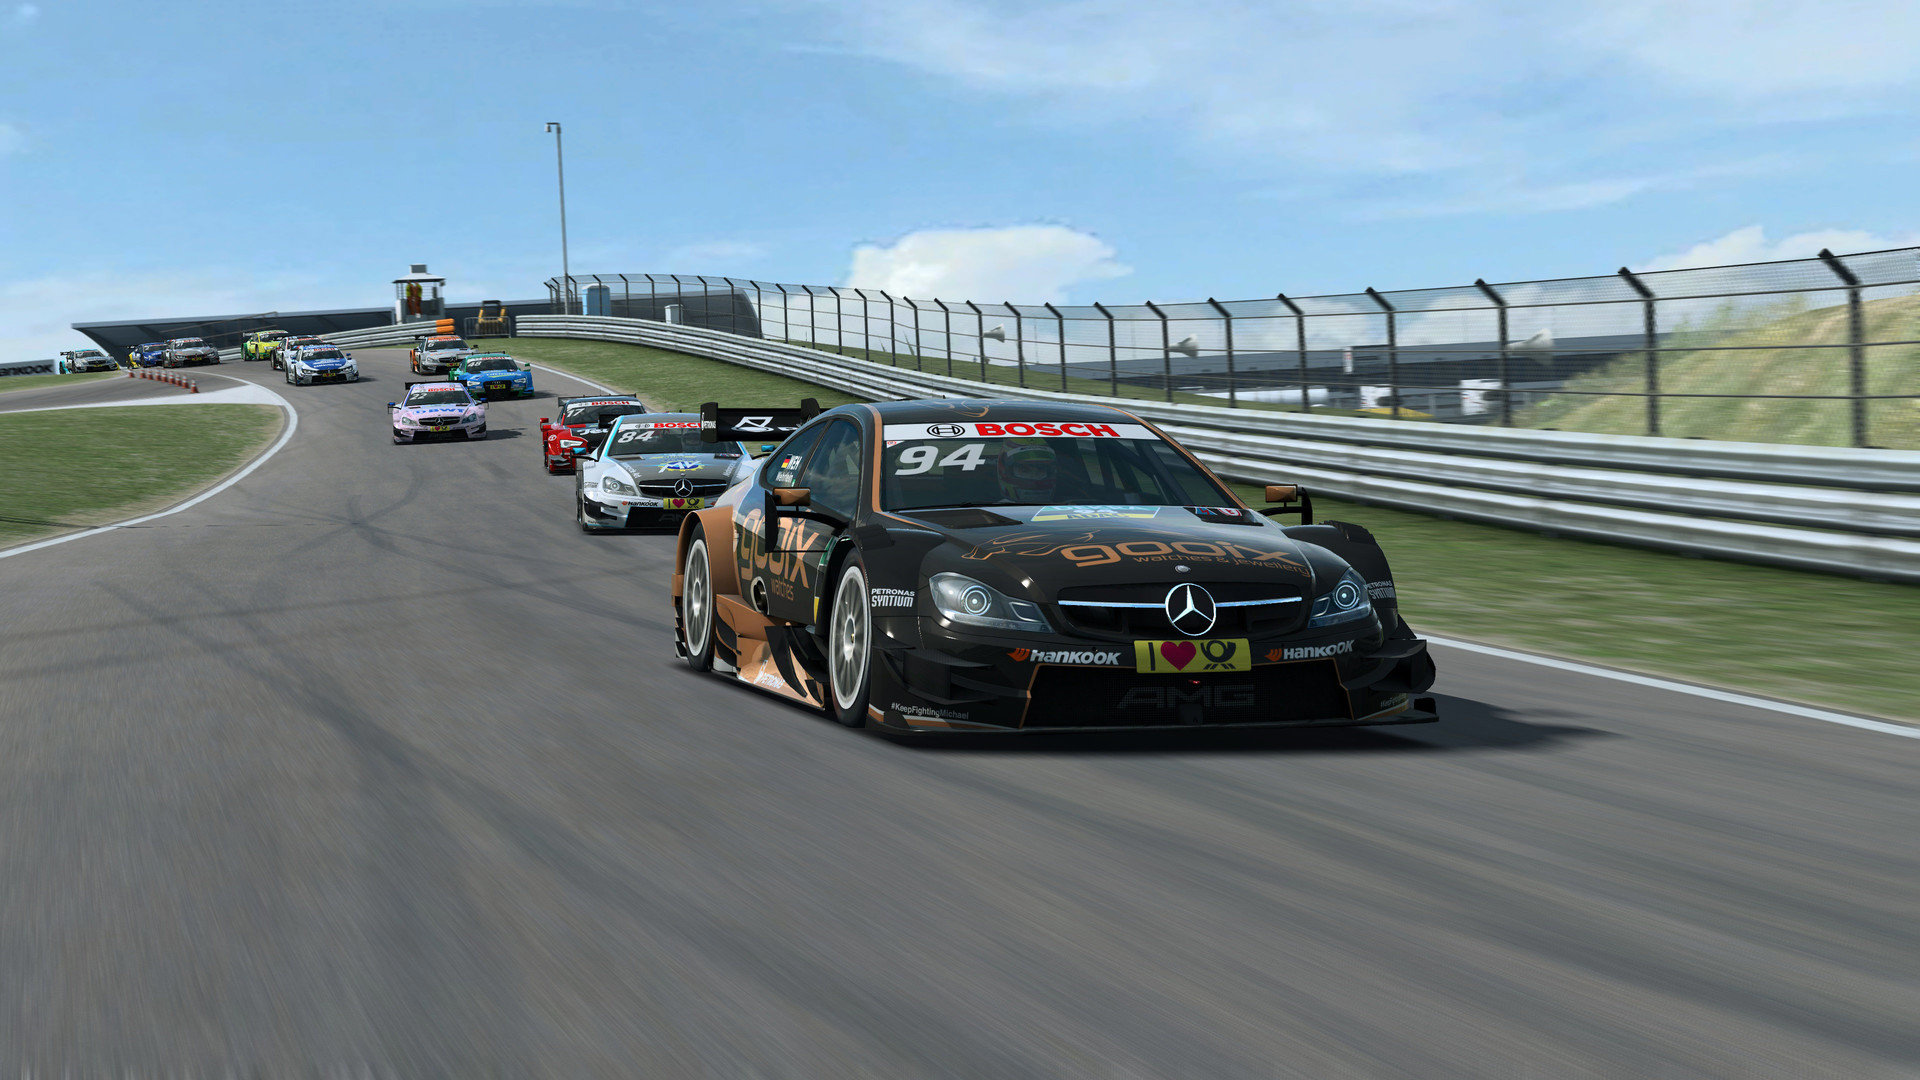 Raceroom Dtm Experience Promotional Art Mobygames